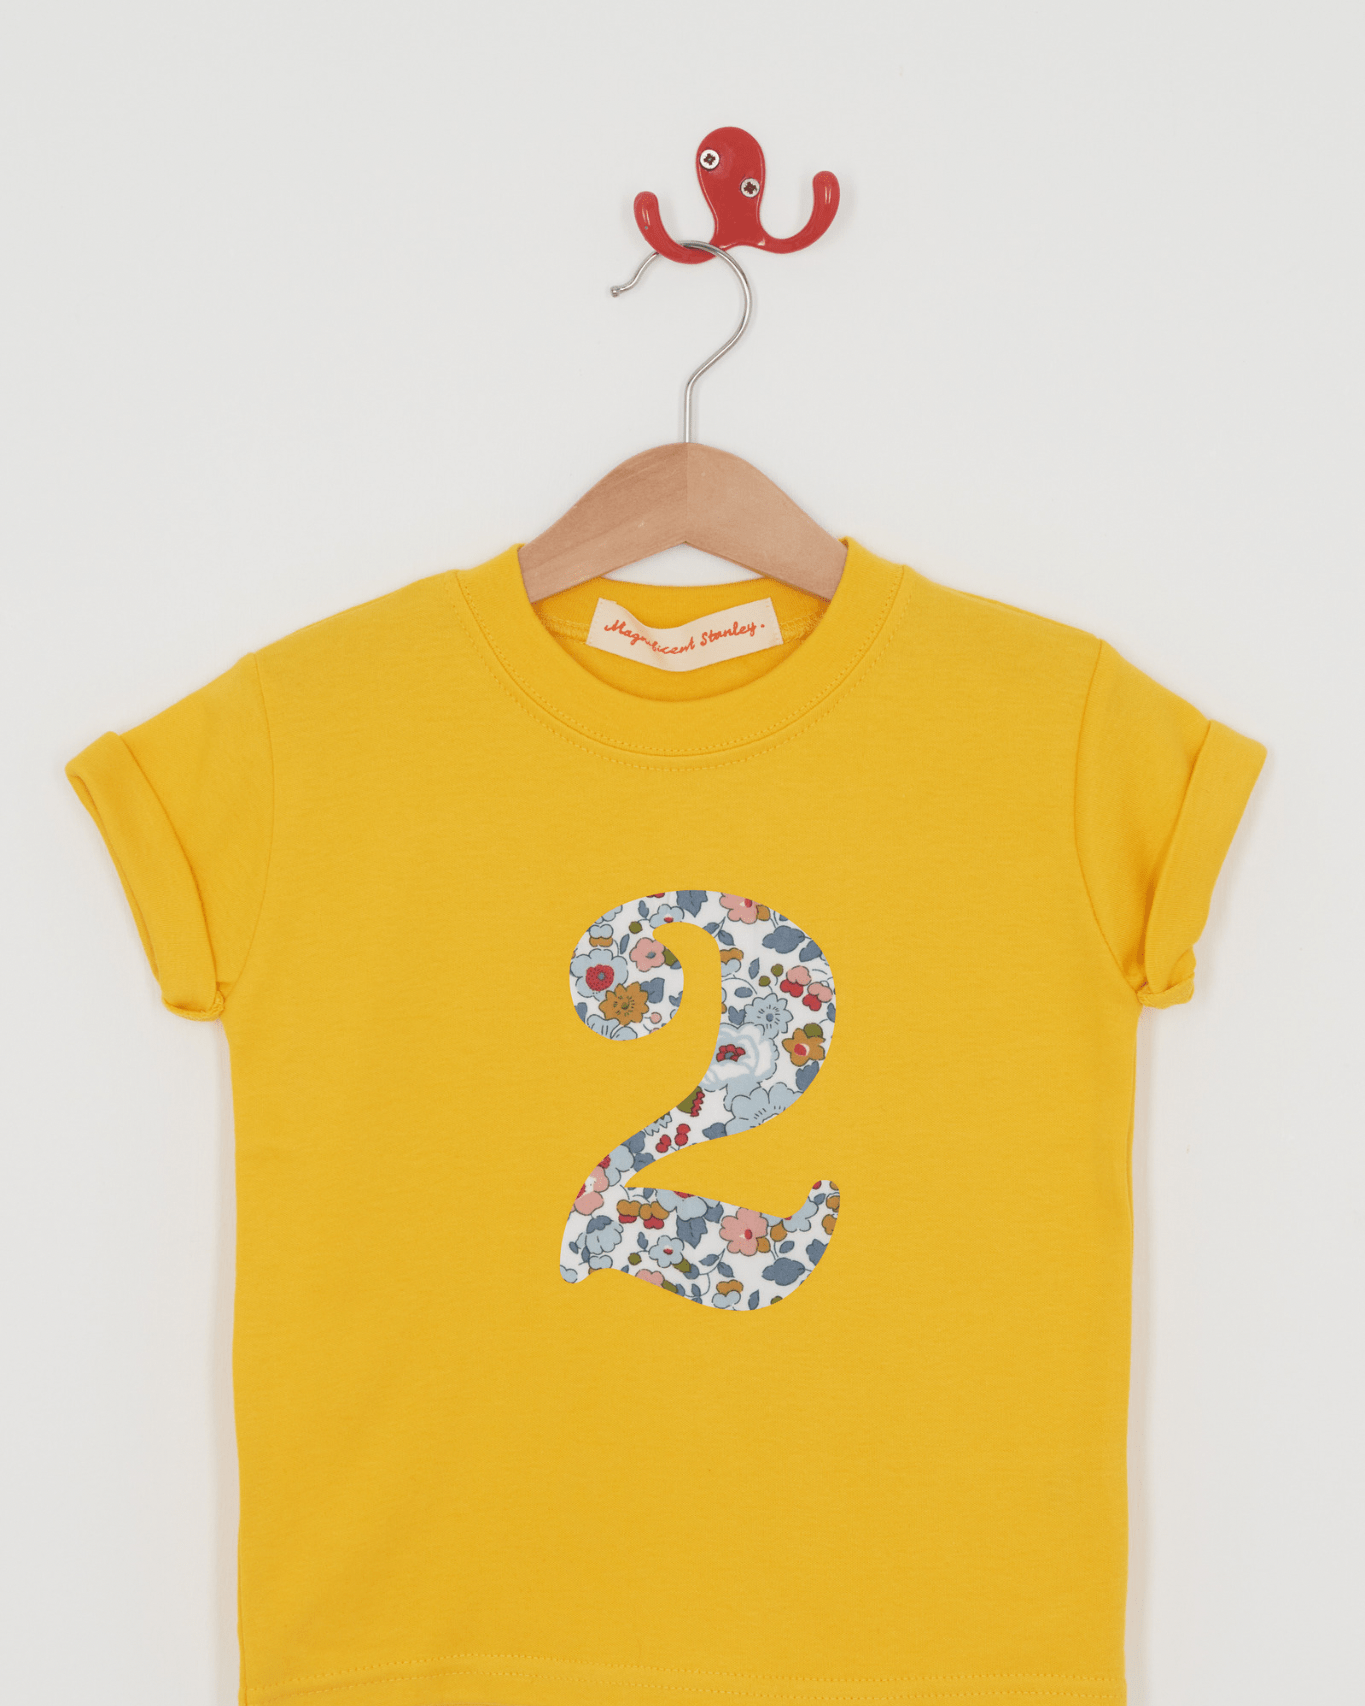 Magnificent Stanley Tee CREATE YOUR OWN Personalised or Age Yellow Liberty Print T-Shirt